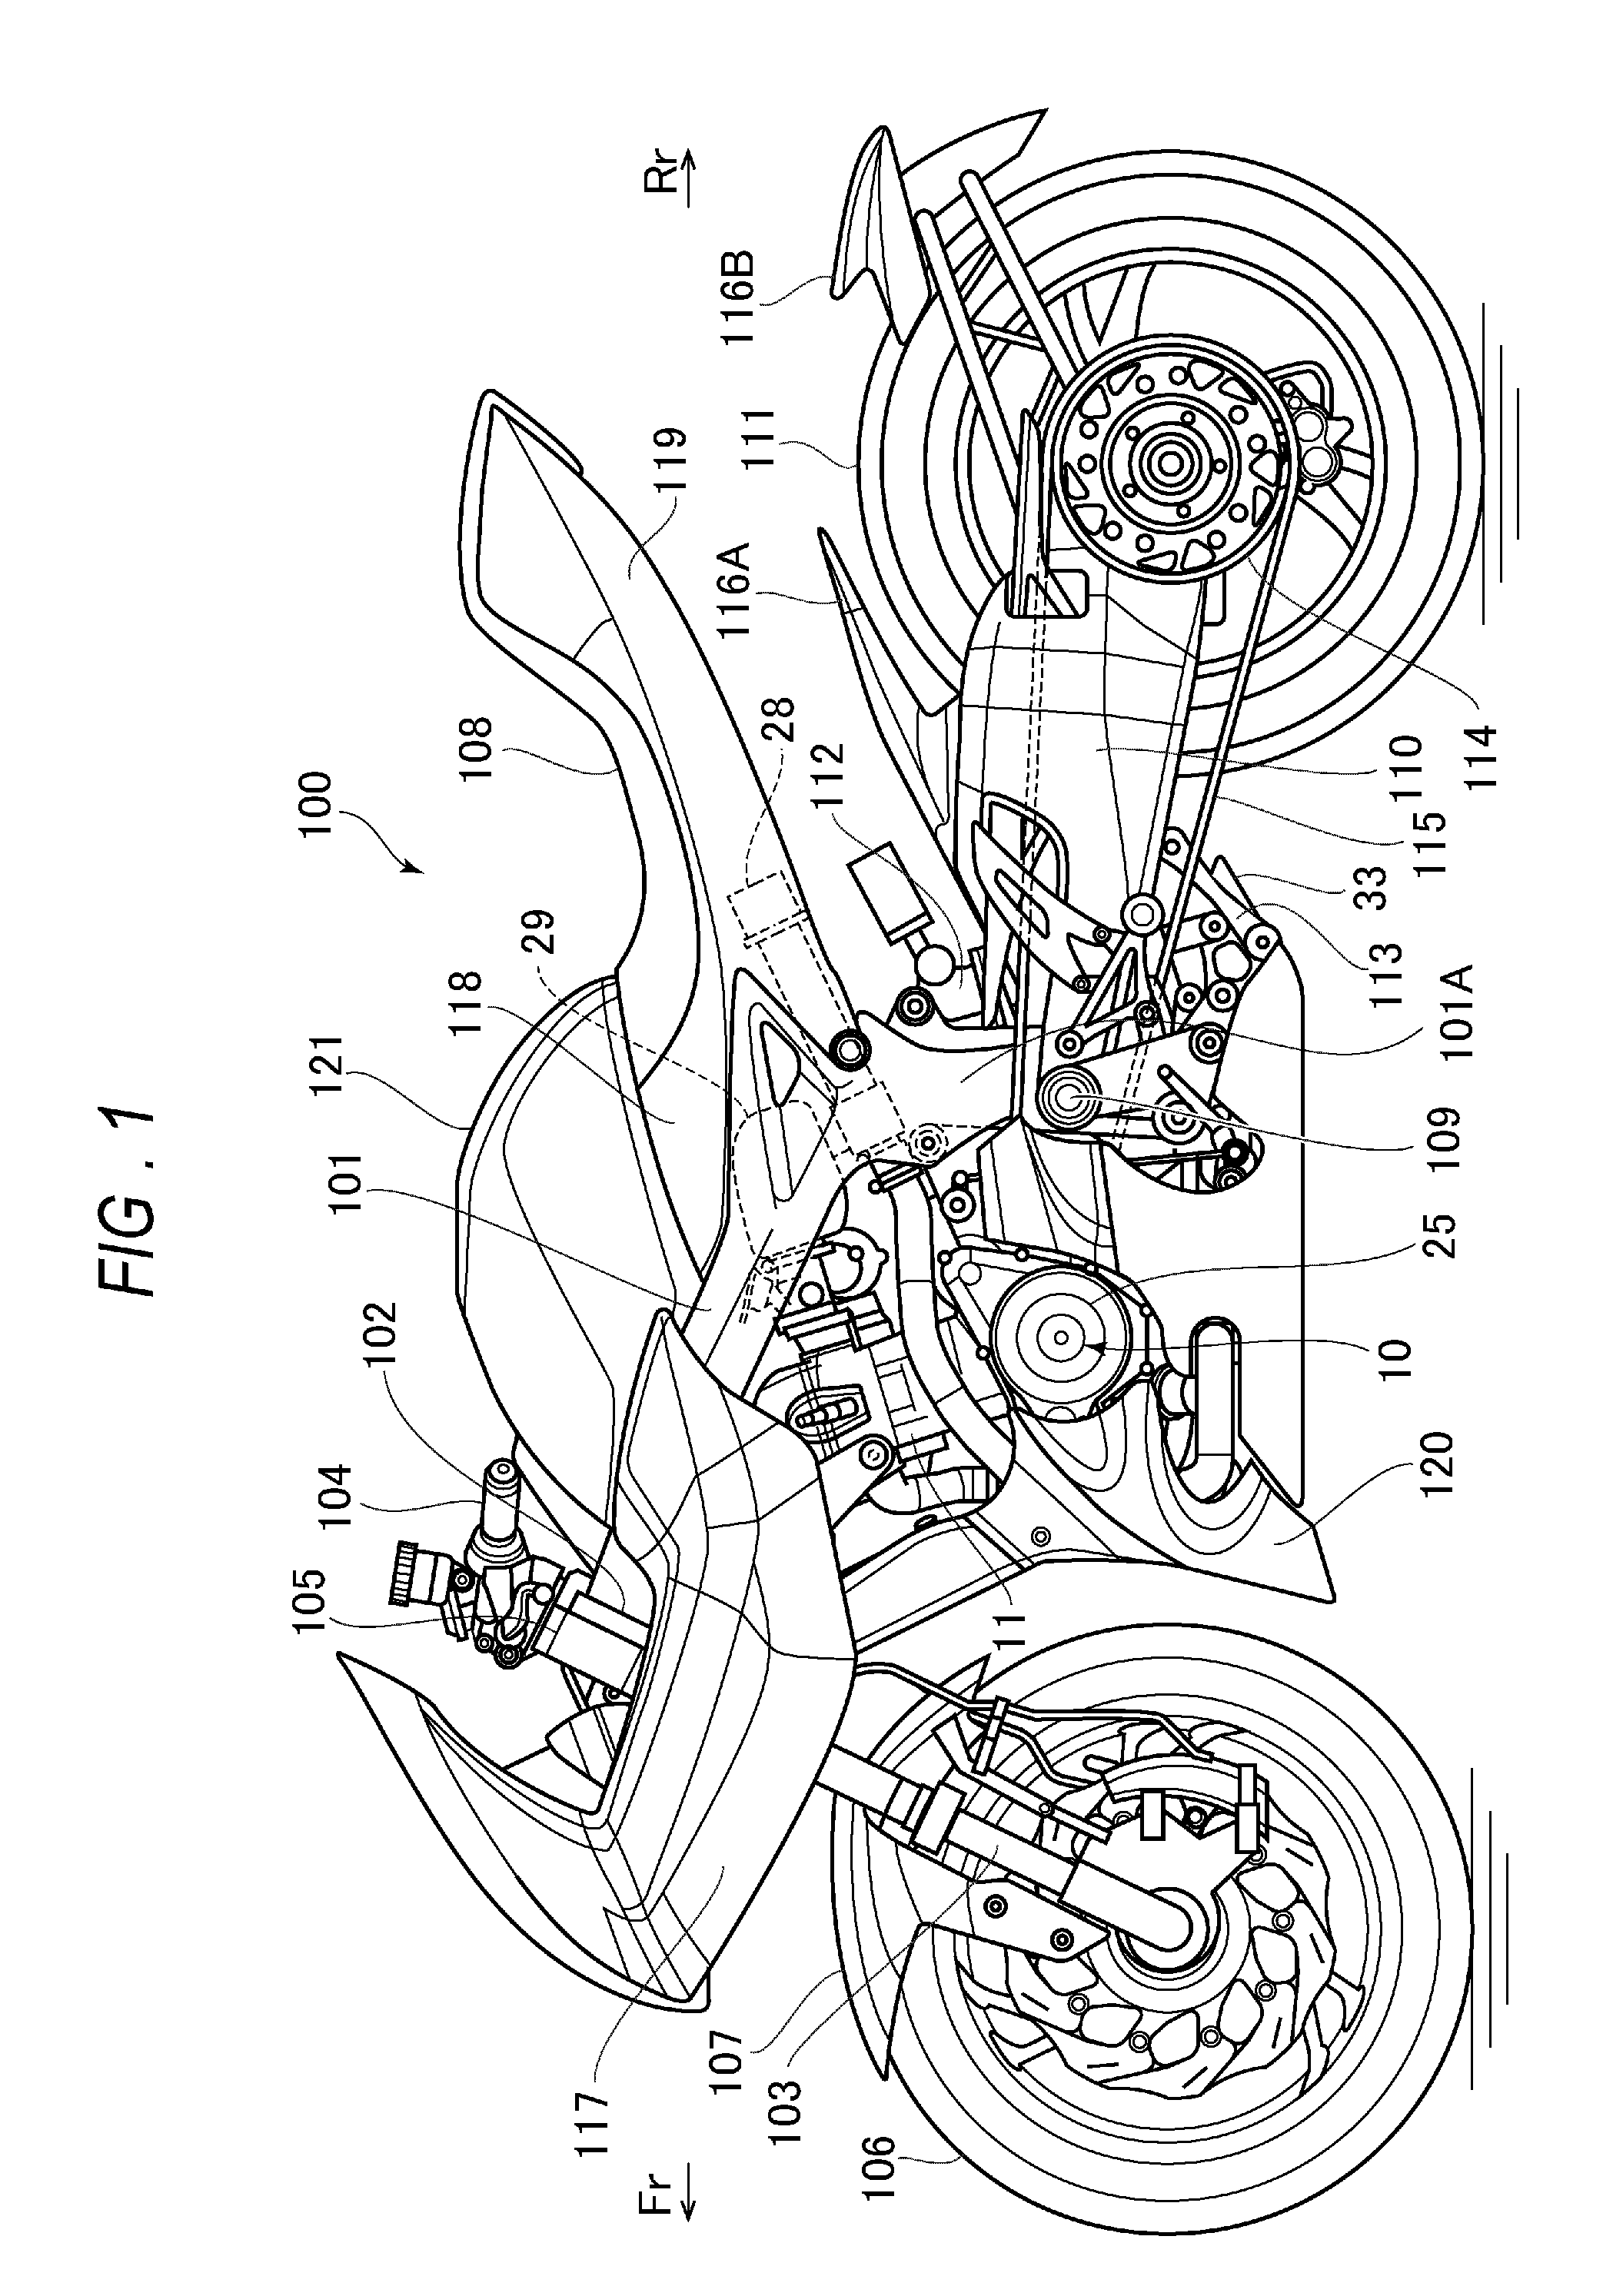 Motorcycle with turbocharger